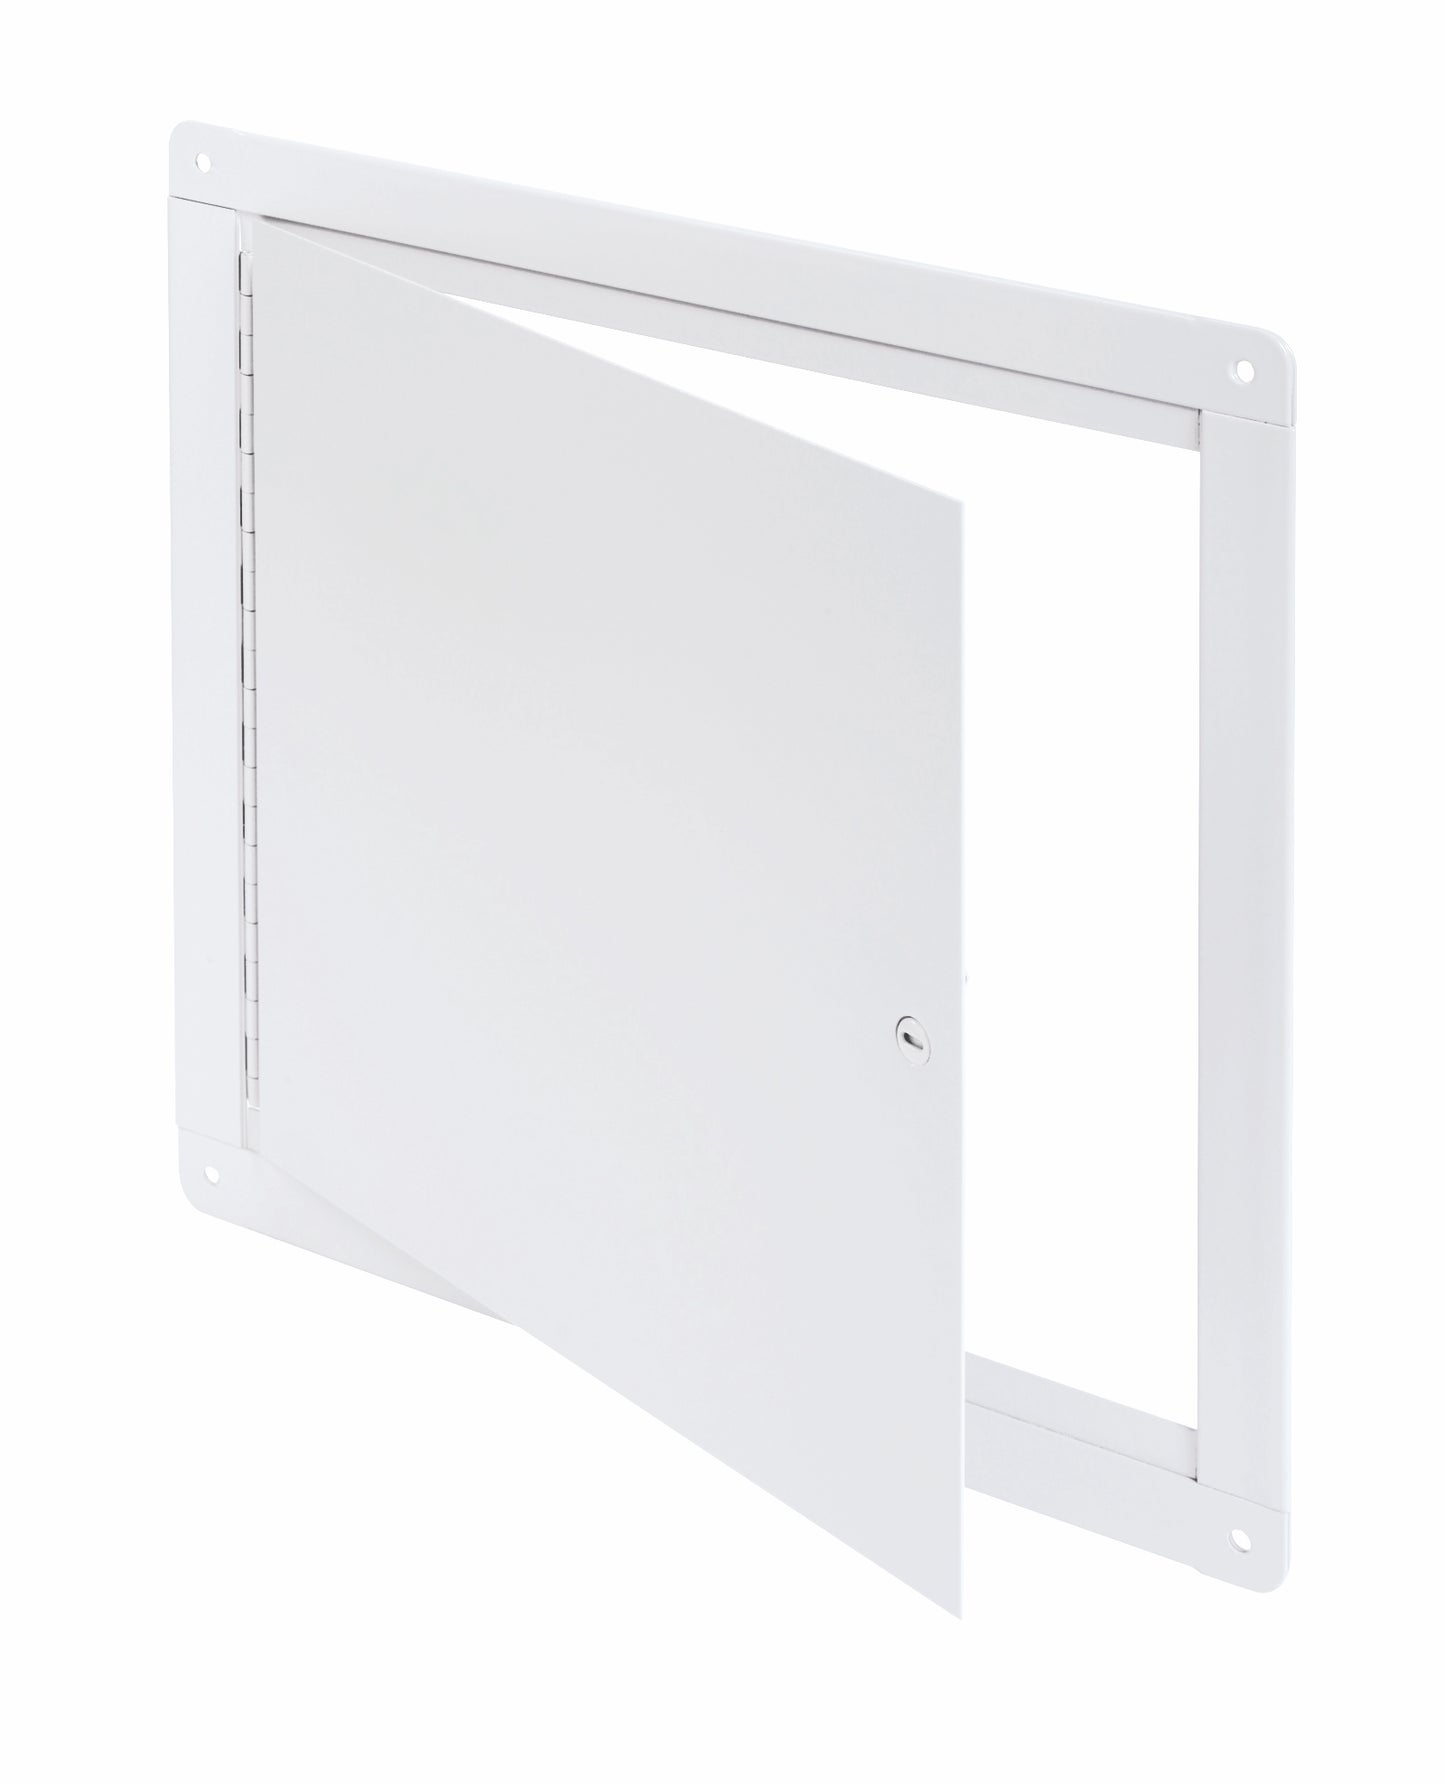 16"x16" Flush Universal Surface Mounted Access Door with Exposed Flange, Cendrex